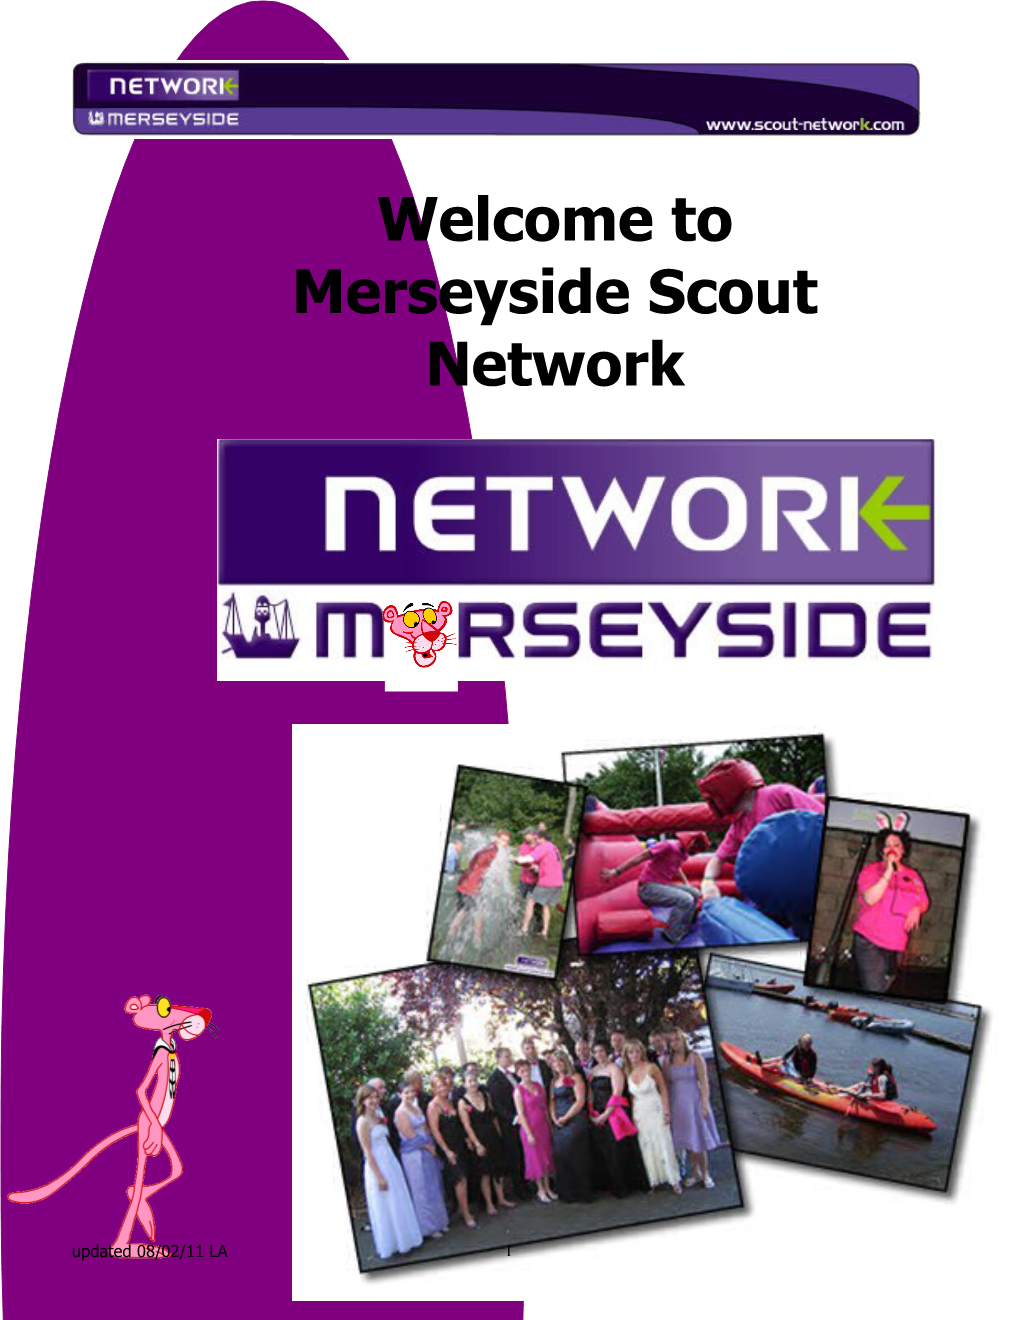 Welcome to Merseyside Scout Network